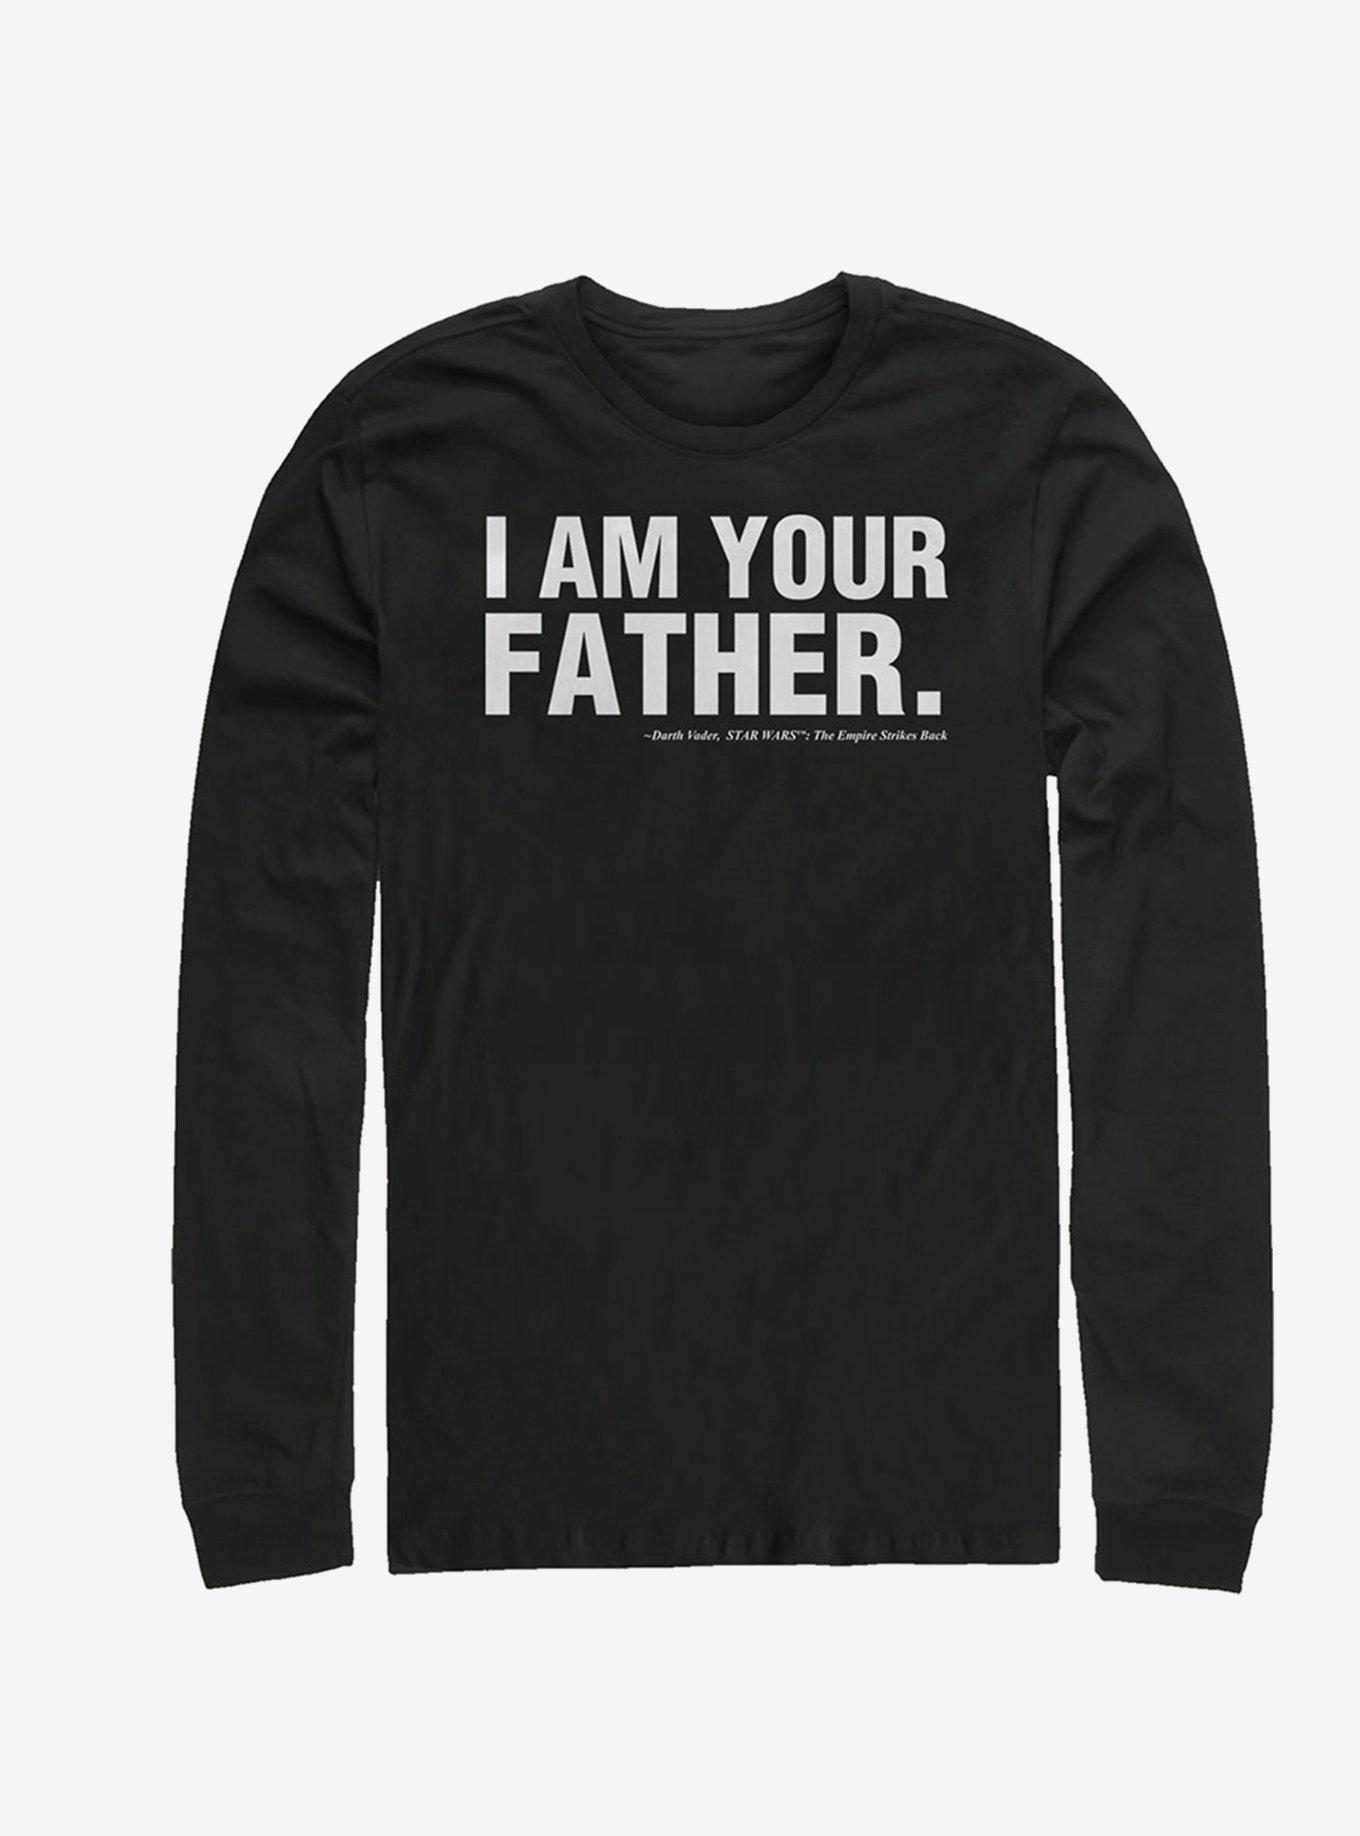 Star Wars The Father Long-Sleeve T-Shirt, BLACK, hi-res